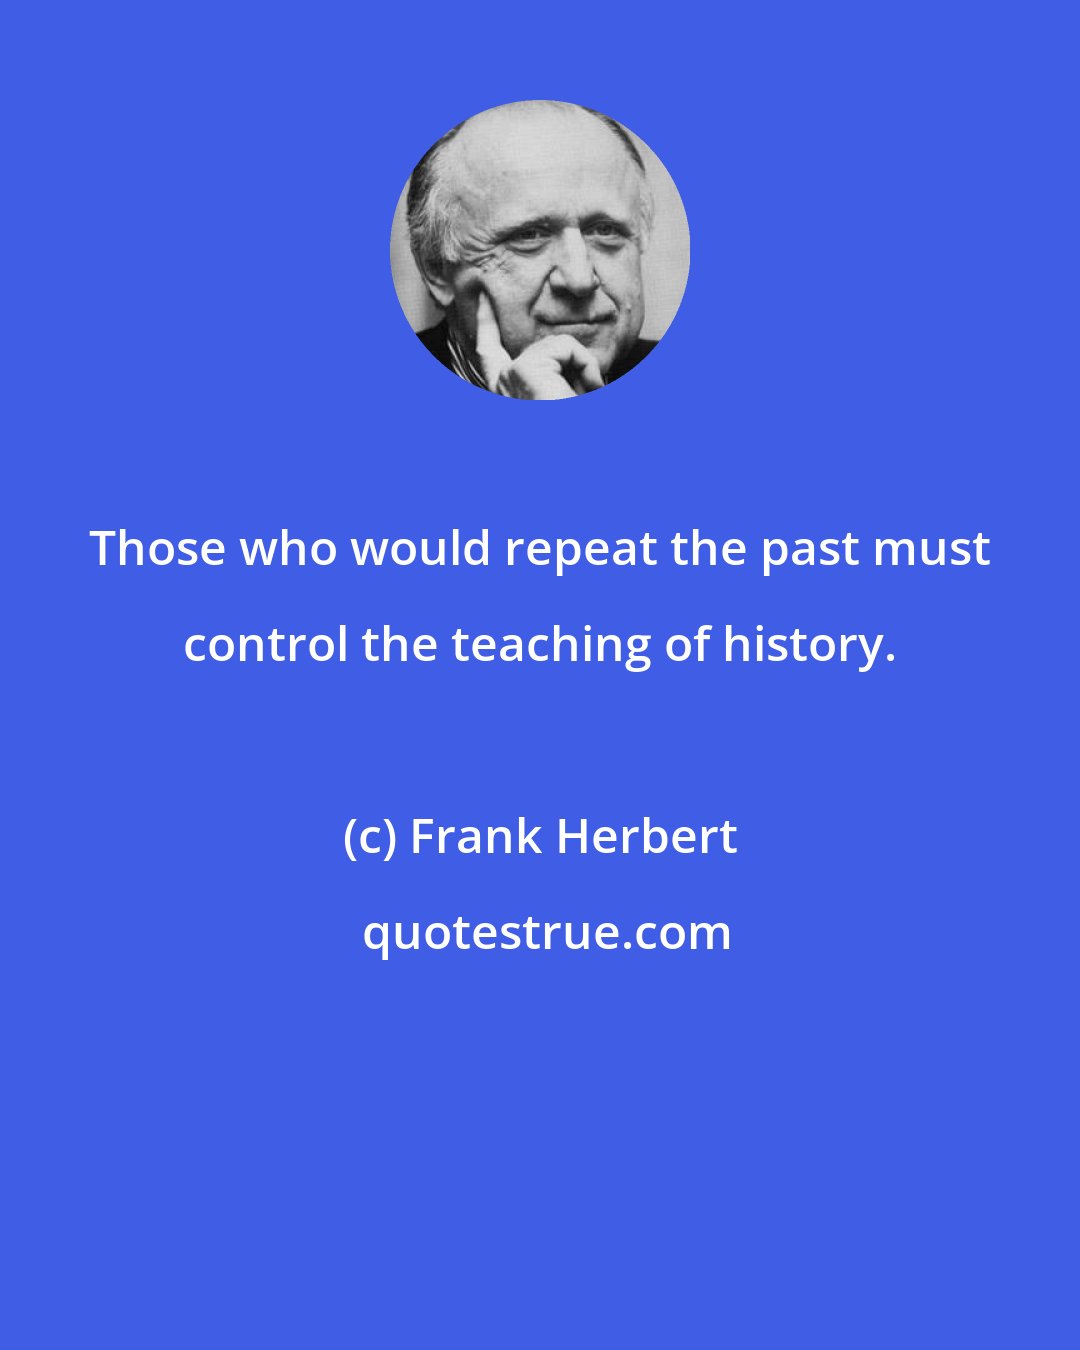 Frank Herbert: Those who would repeat the past must control the teaching of history.